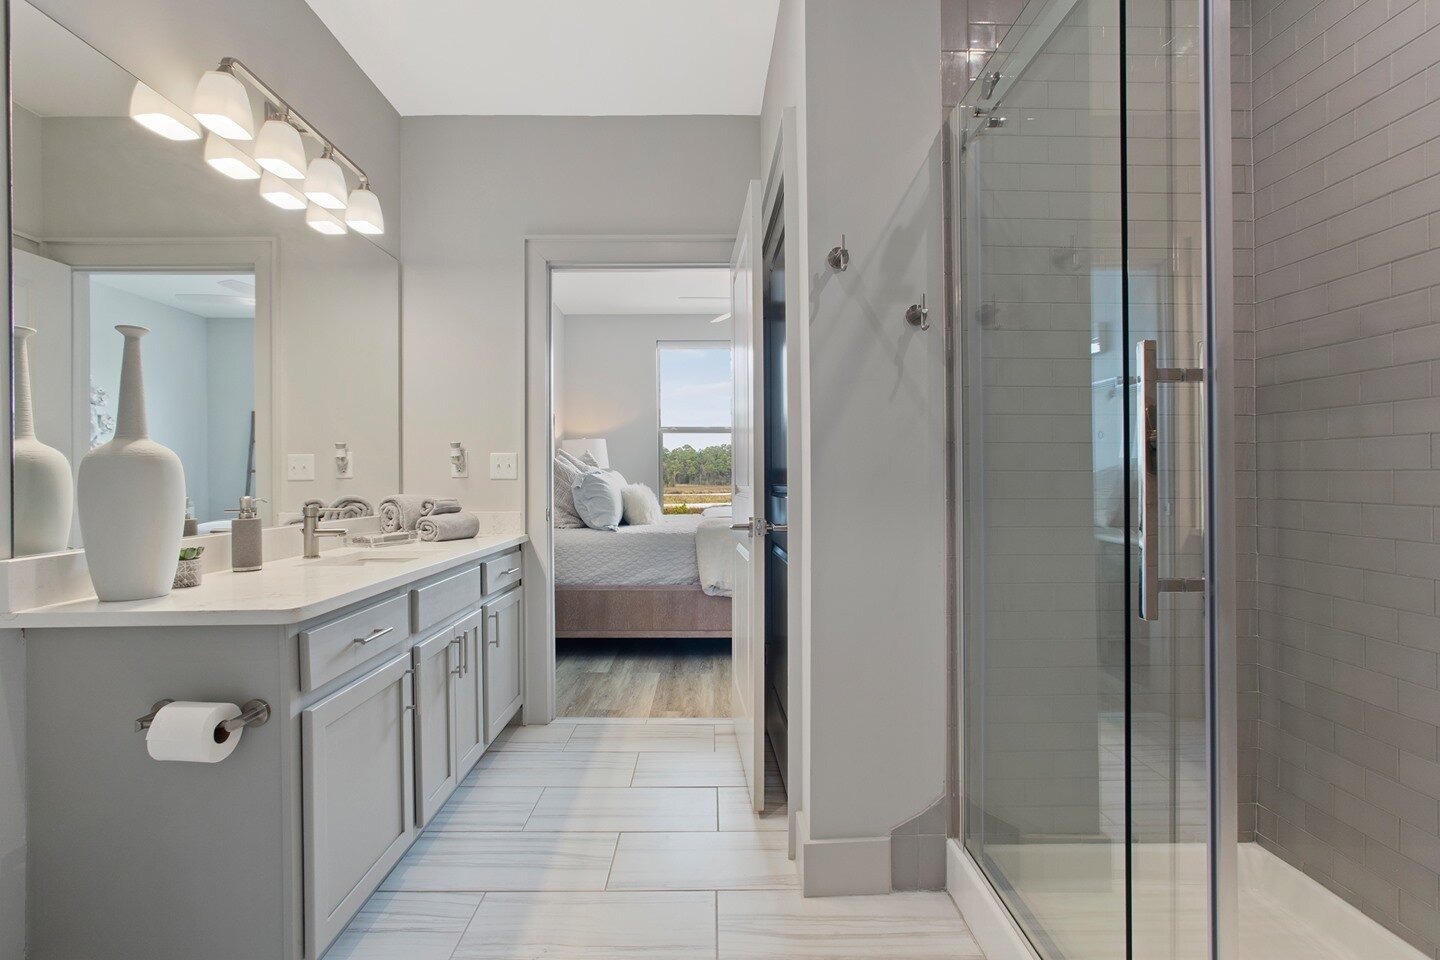 Take your at-home spa days to the next level at The Inlet! 🛁 Each unit comes gorgeously appointed with a double vanity,  tiled shower, walk-in closet, and lots of light! 

Schedule your showing today! ➡️(228) 872-0141